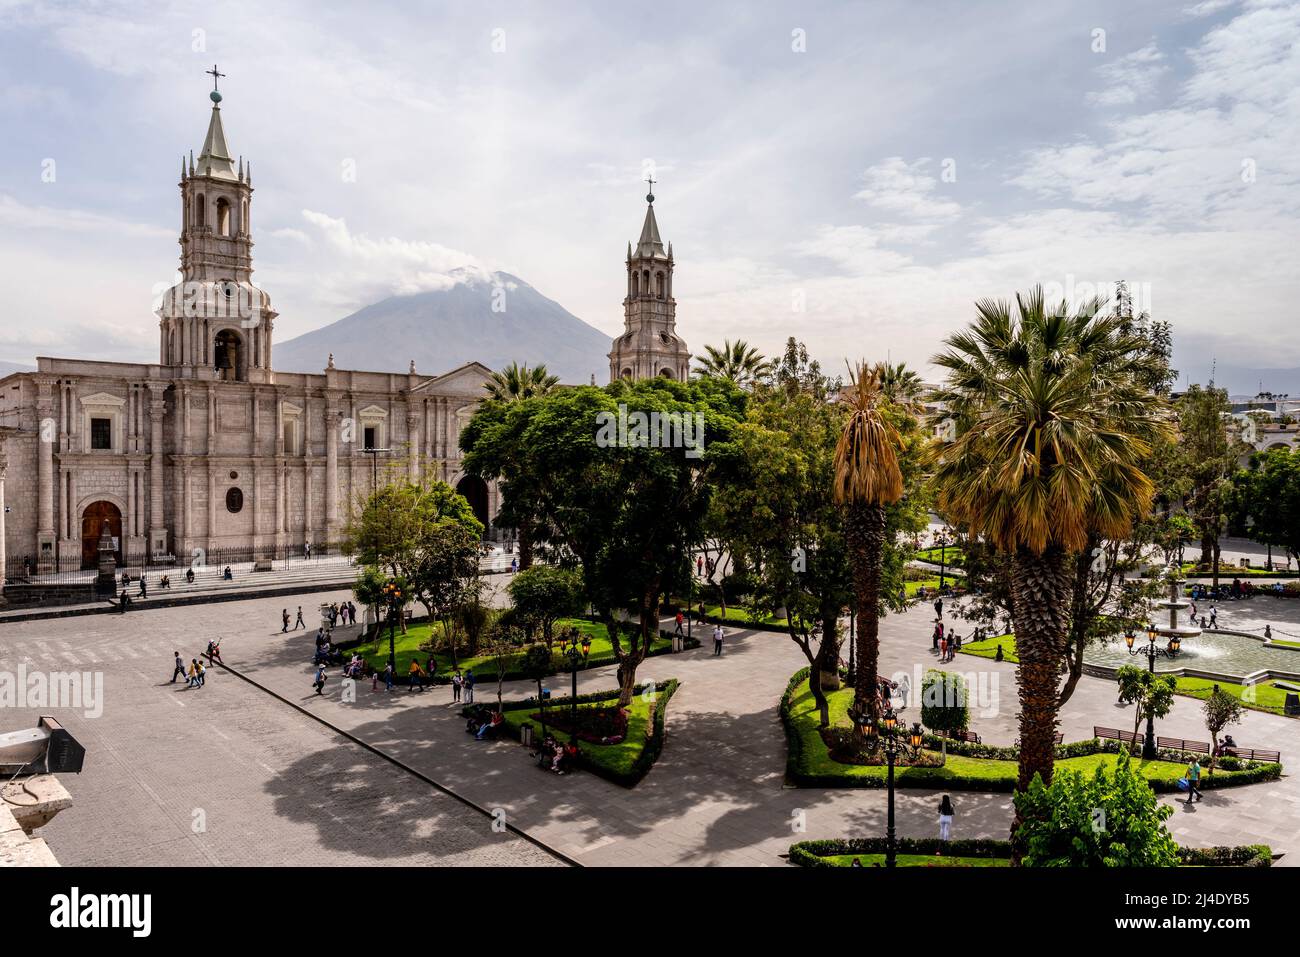 The Basilica Cathedral of Arequipa and The Plaza De Armas, Arequipa, Peru. Stock Photo